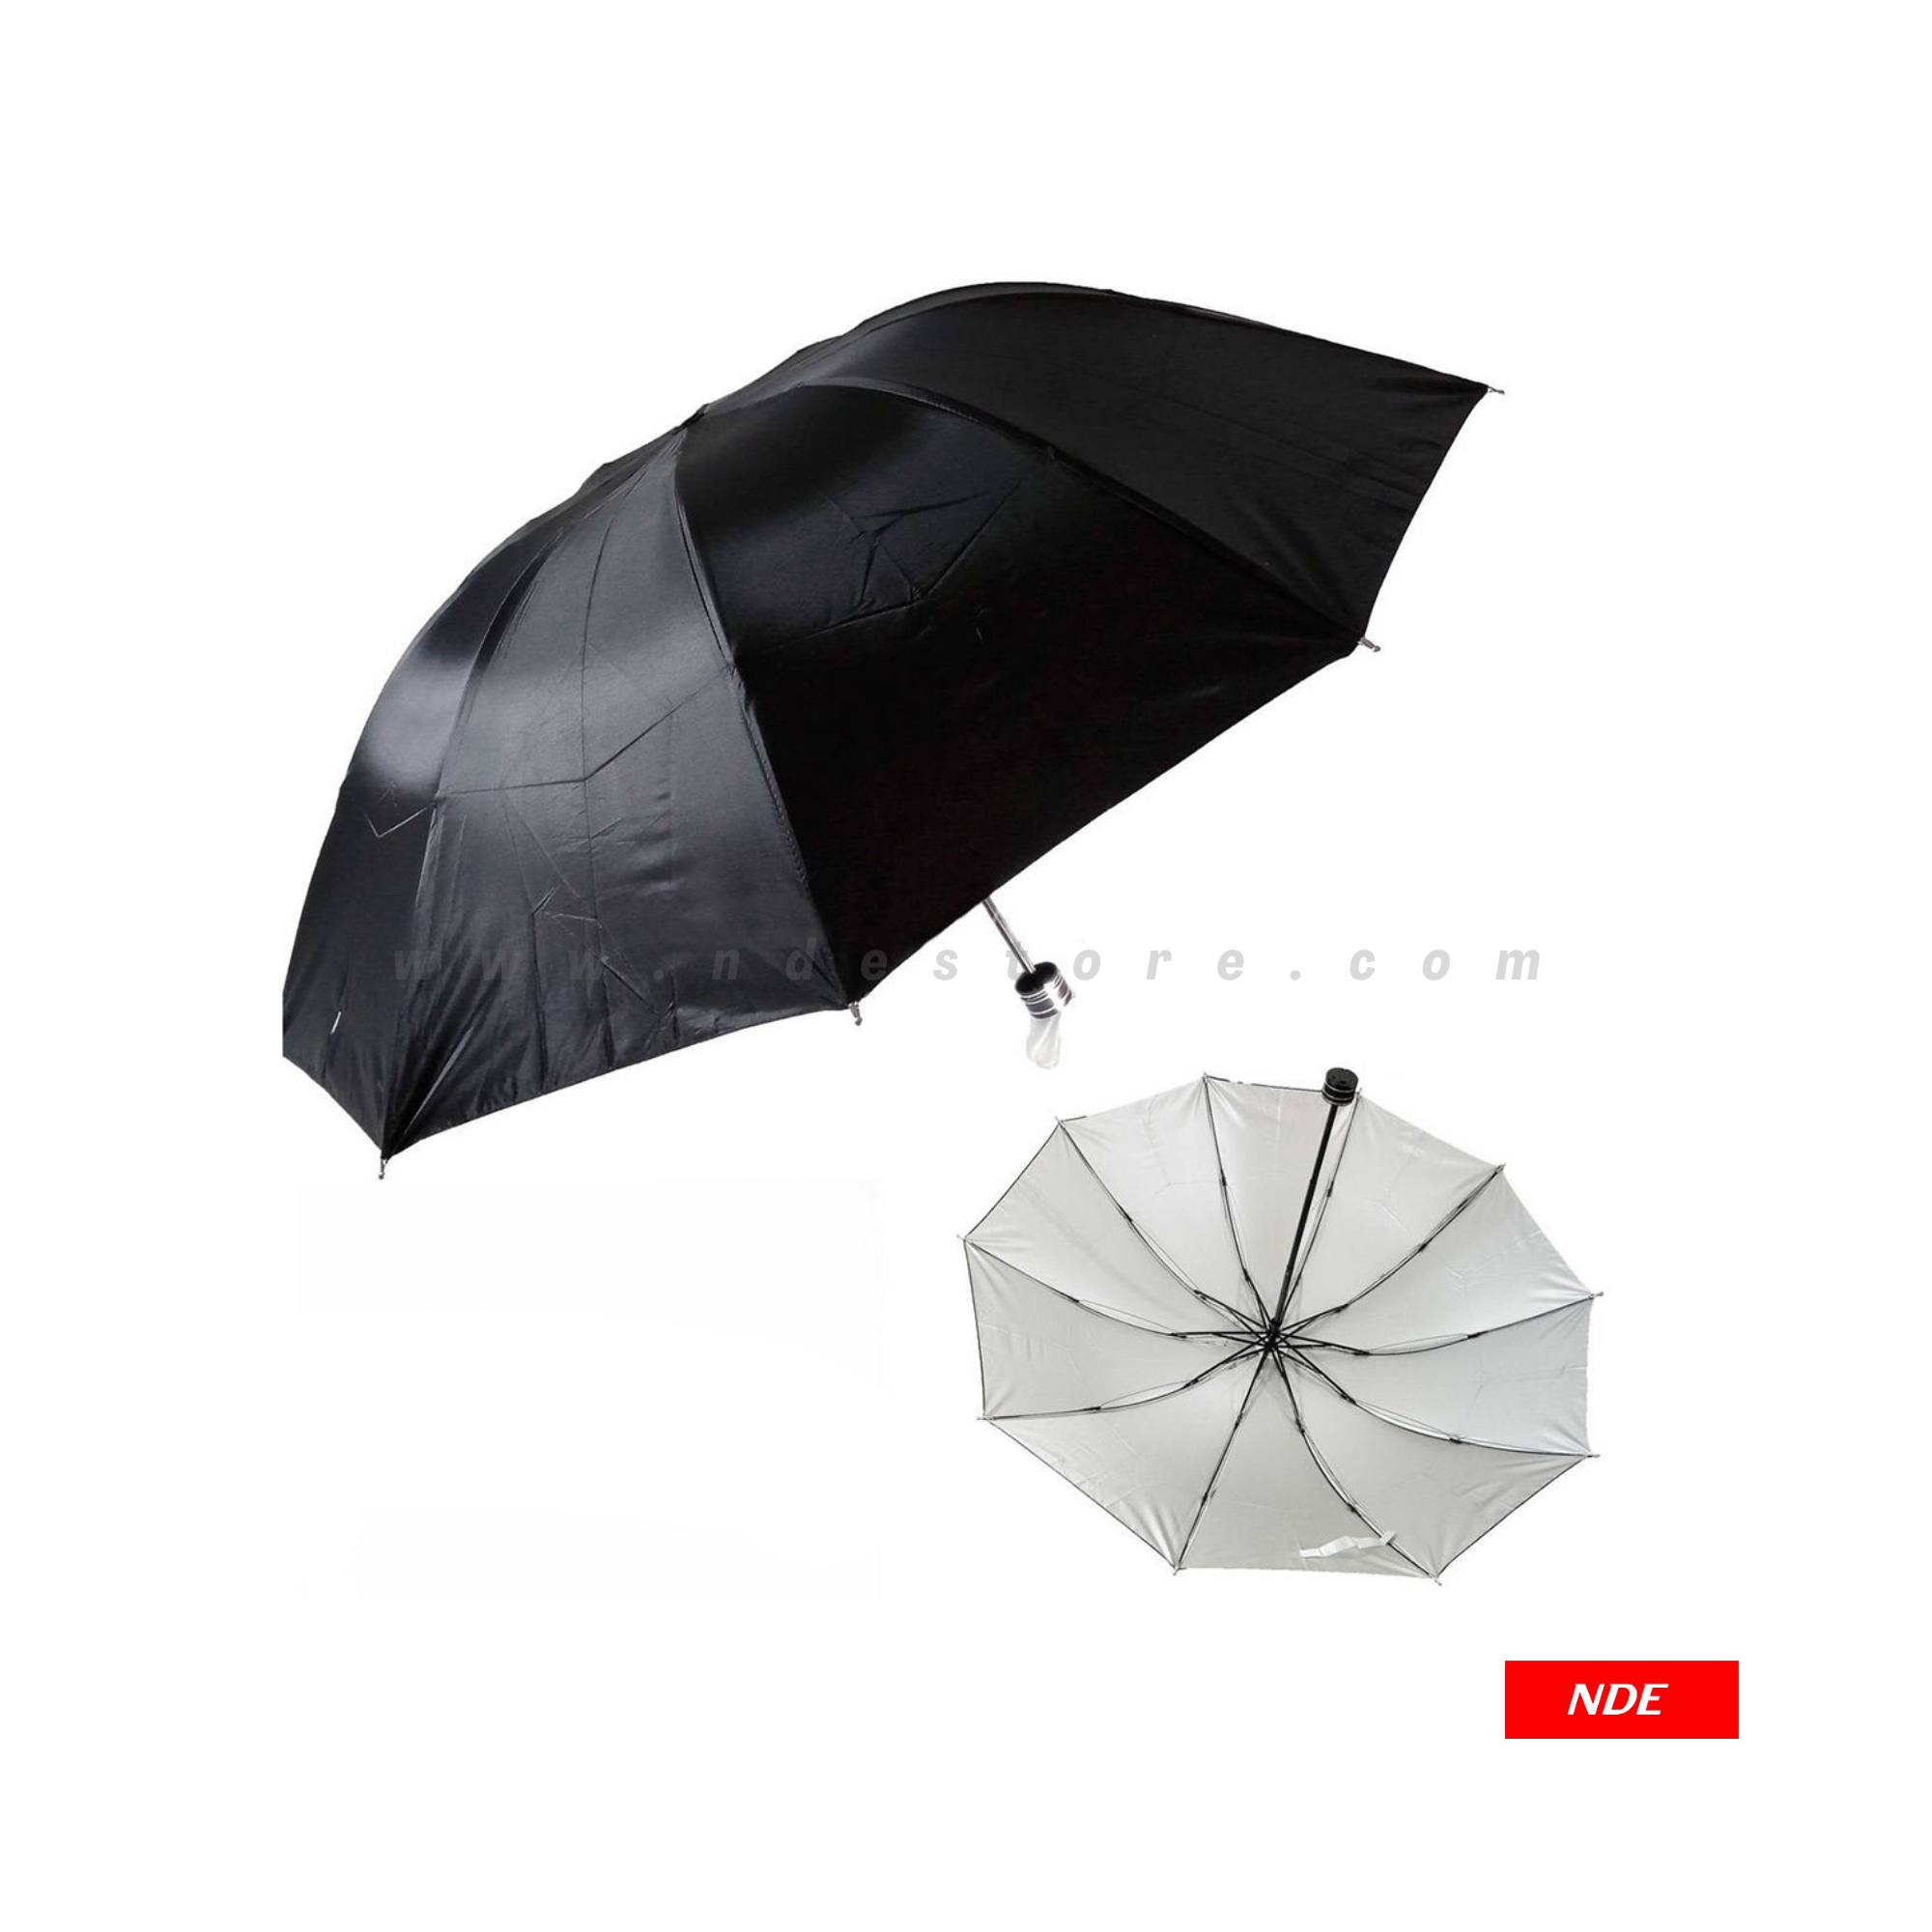 UMBRELLA LIGHT WEIGHT AND COMPACT